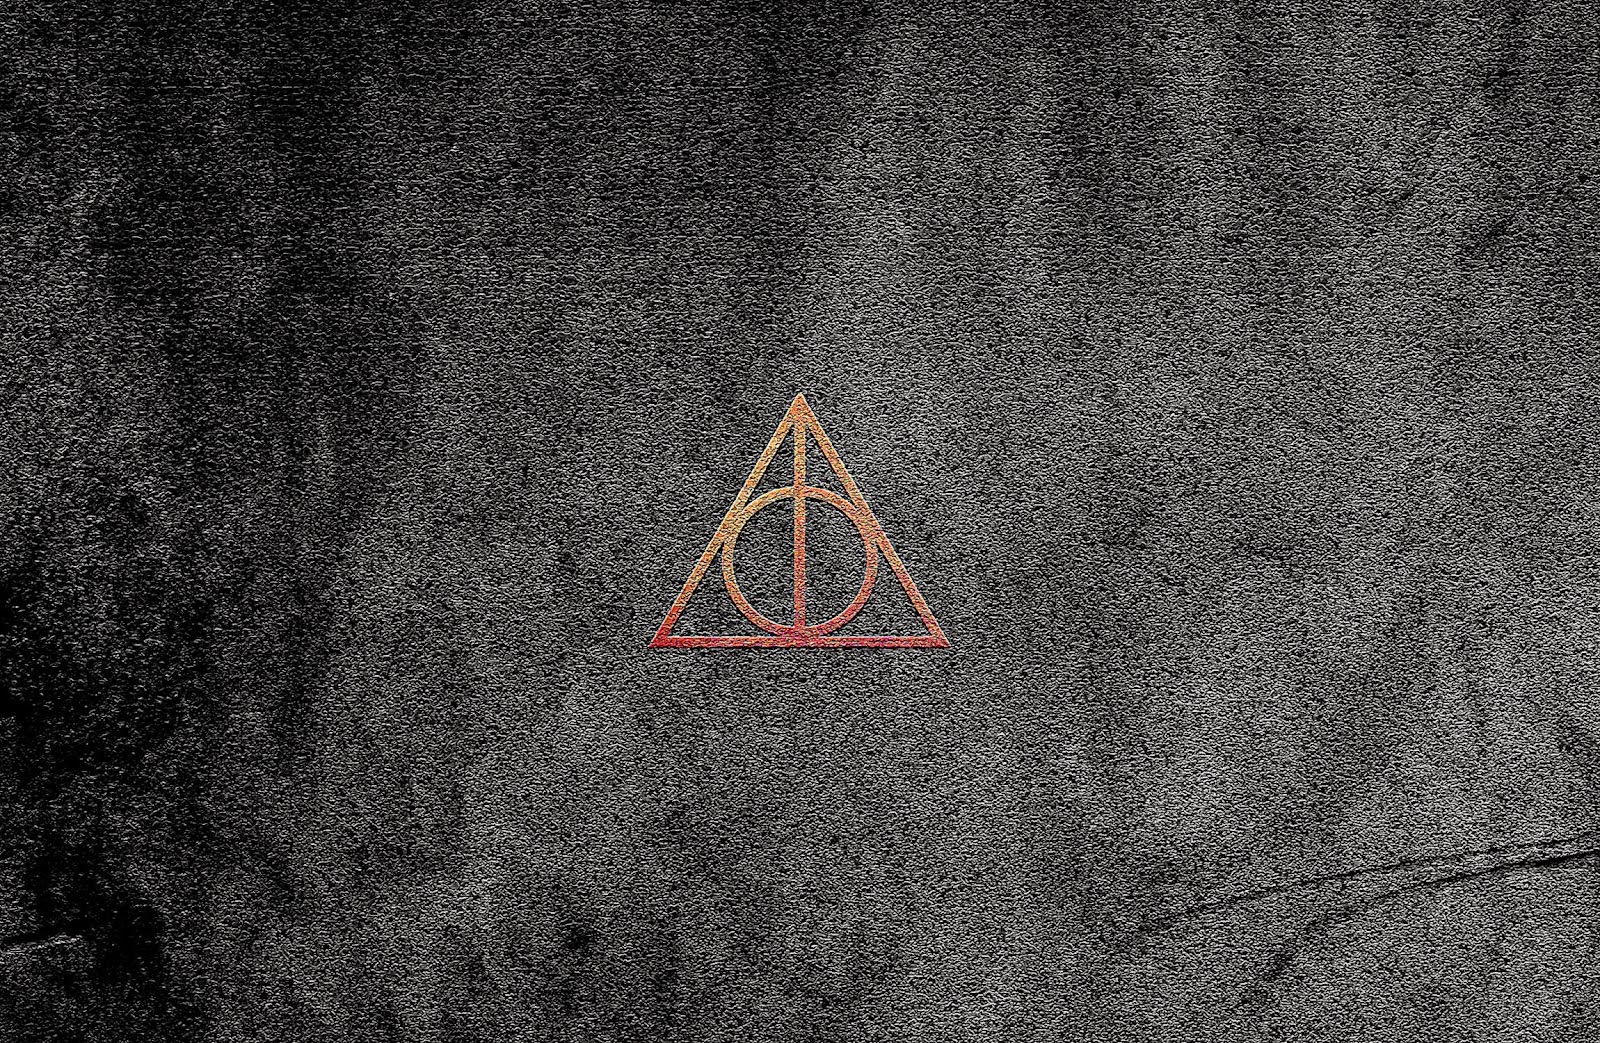 Deathly Hallows Wallpaper | Cool HD Wallpapers